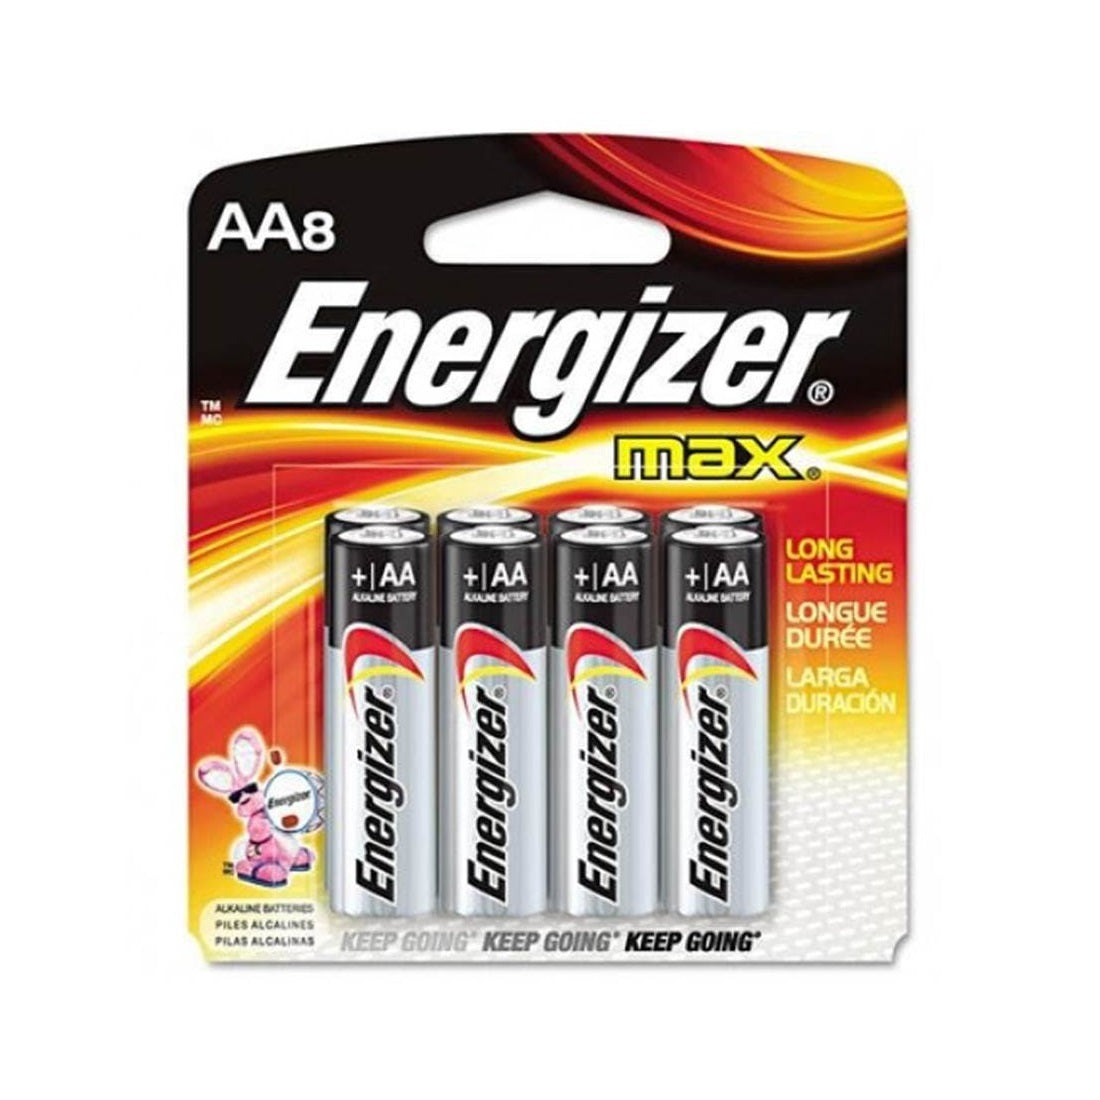  Energizer AA Batteries, Max Double A Battery Alkaline, 8 Count  : Health & Household